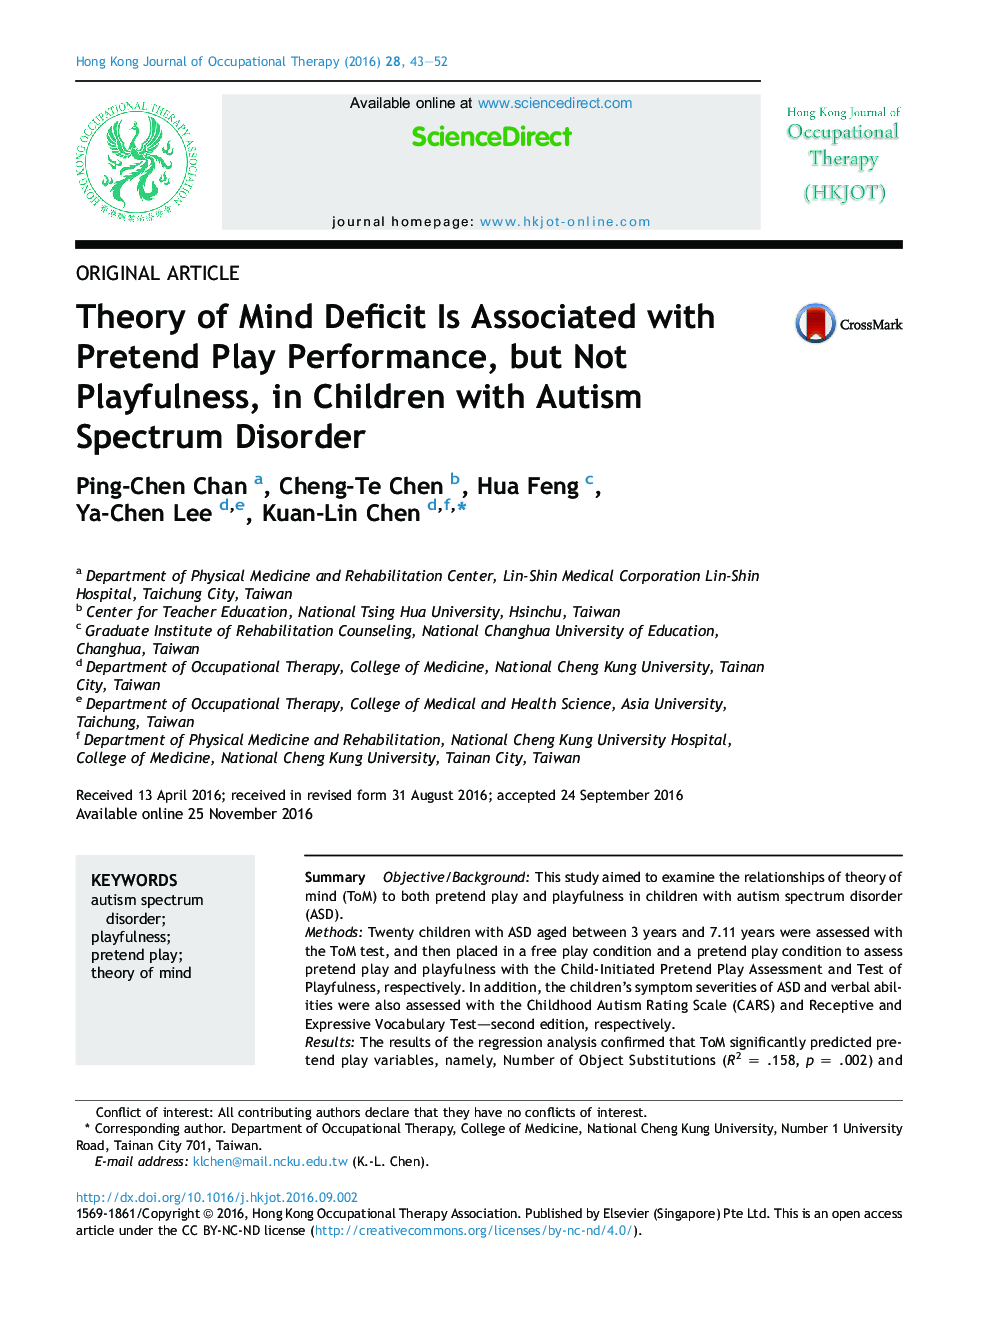 Theory of Mind Deficit Is Associated with Pretend Play Performance, but Not Playfulness, in Children with Autism Spectrum Disorder